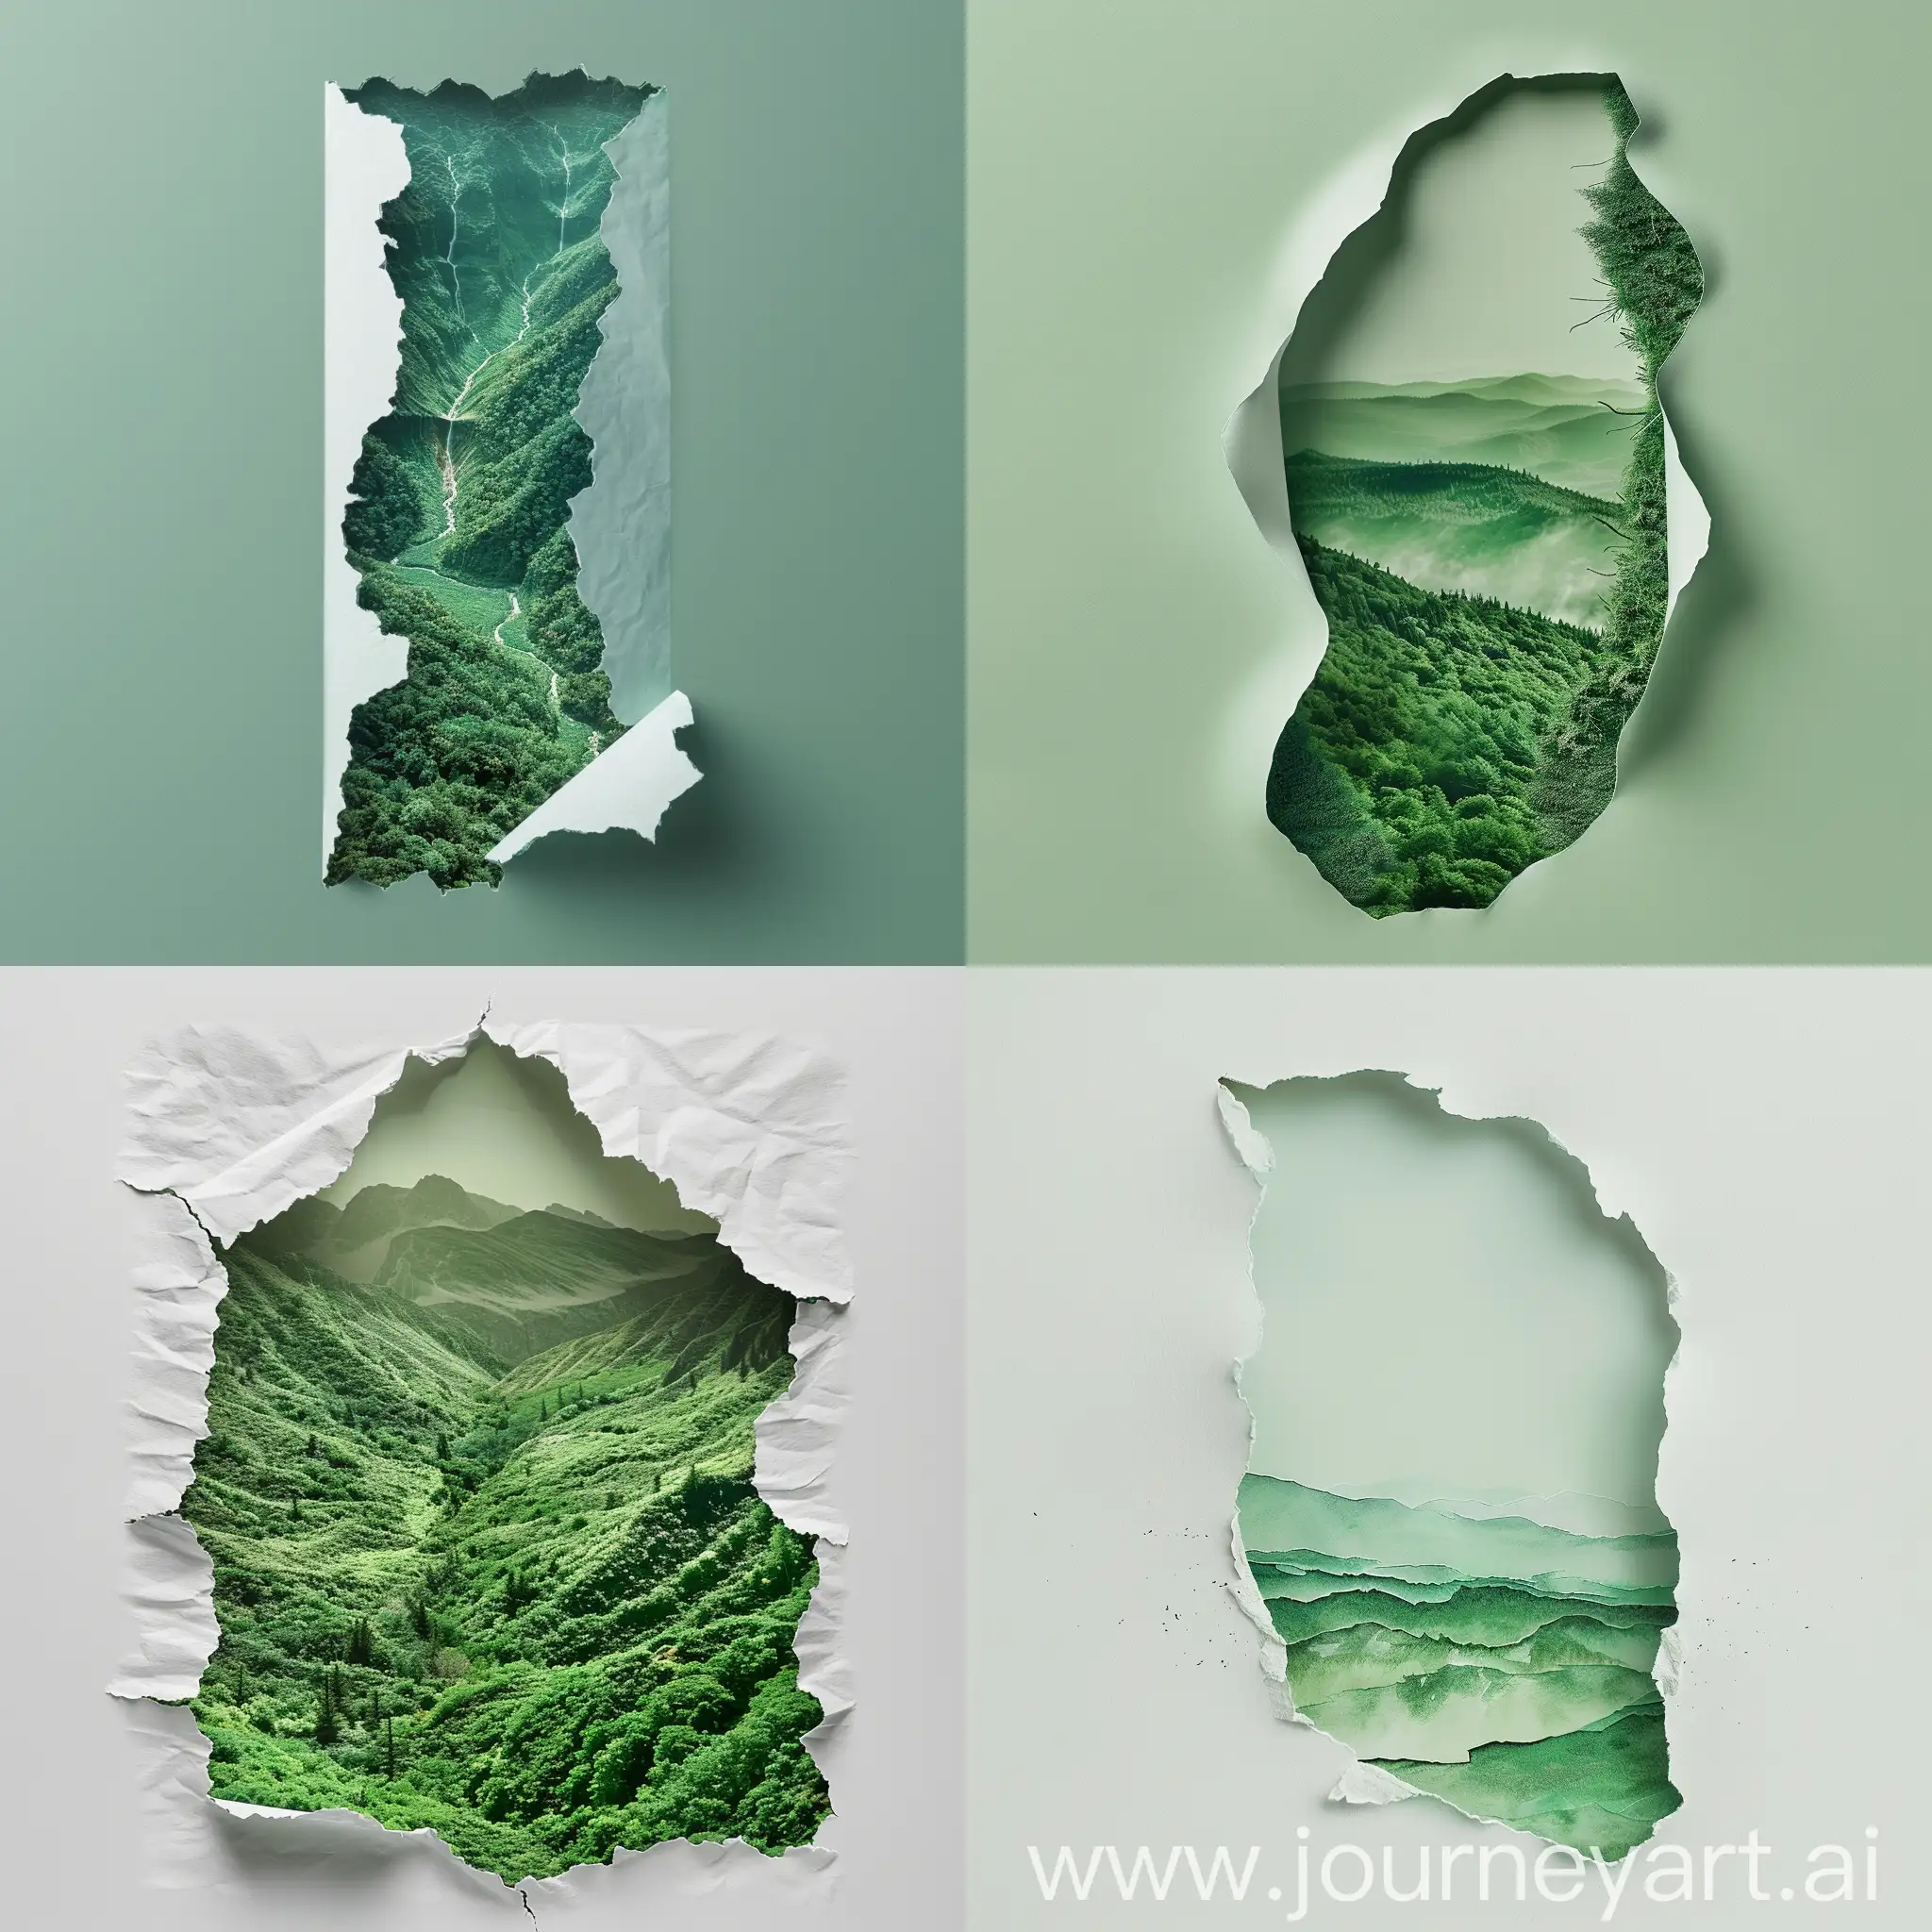 A soft ui image of a cutted piece of paper revealing green screen. The cutted paper is vertically oriented, with the smooth edges and smooth, as it is beautiful because it was beautiful ui shape. The contrast between the textured white paper and the detailed landscape creates a beautiful visual effect, capturing a feeling of discovery and wonder